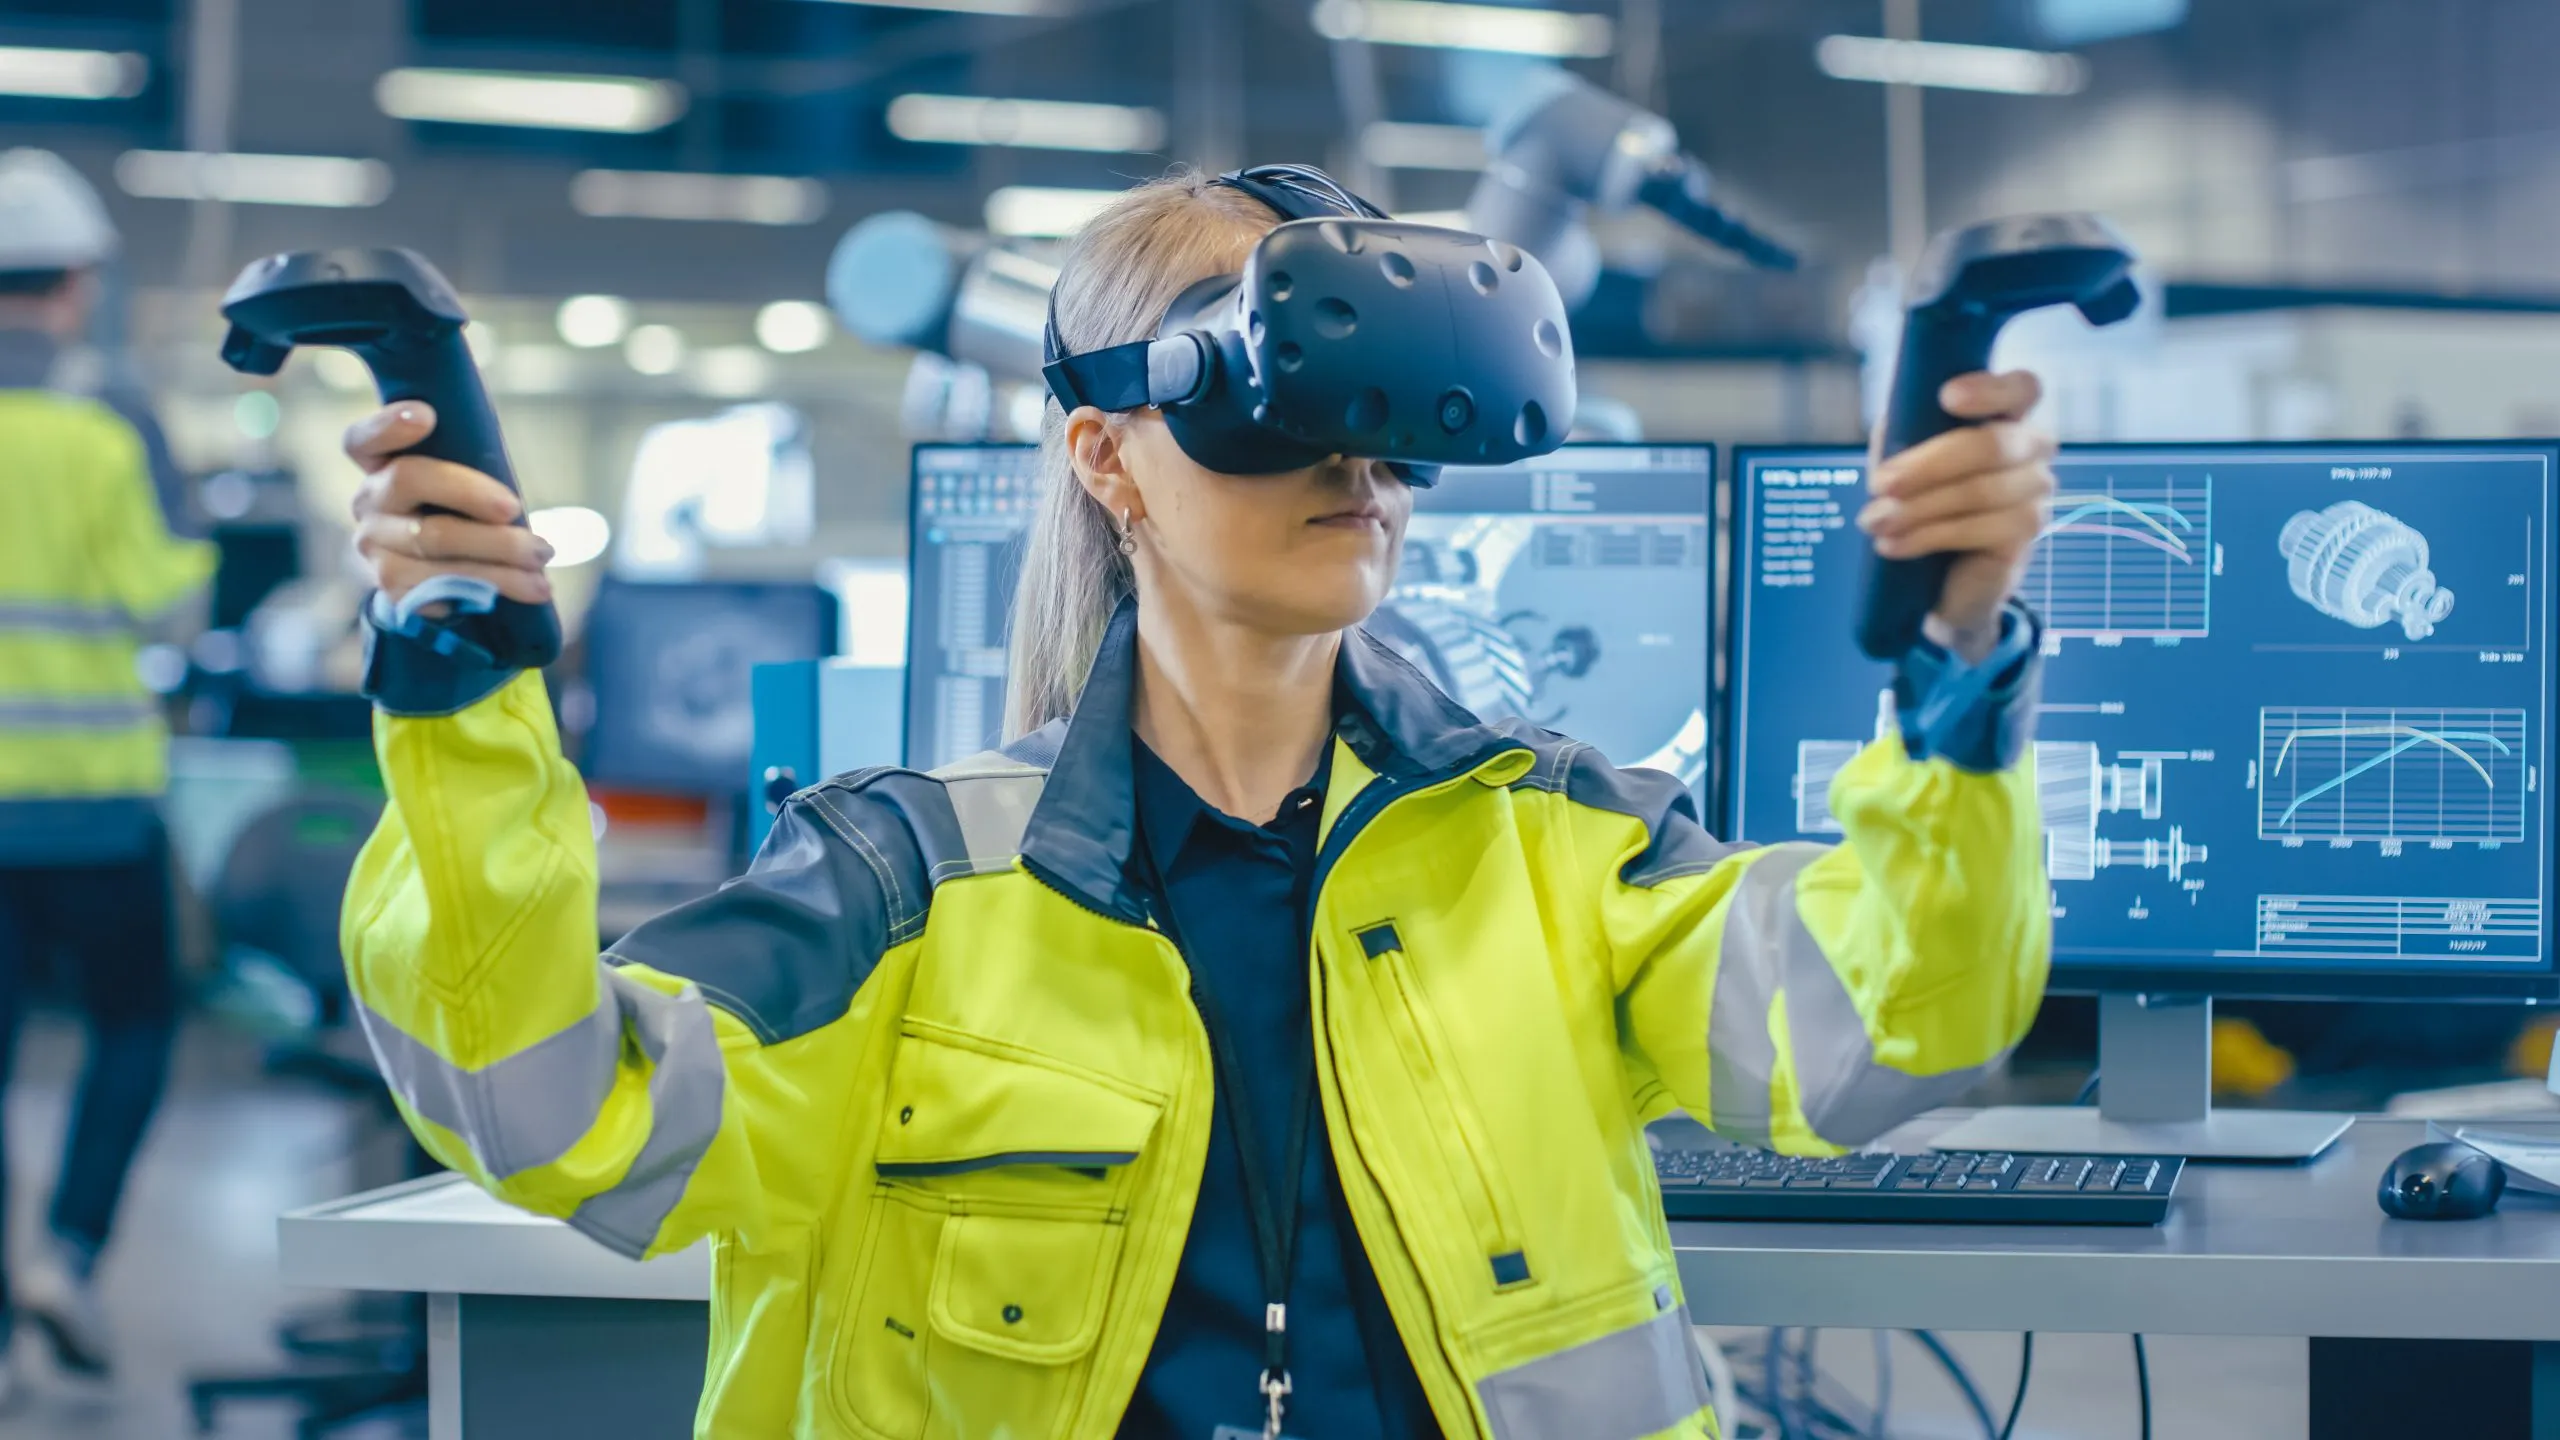 VR Meets HR: Enterprise Solutions for a Covid-world (and Beyond)